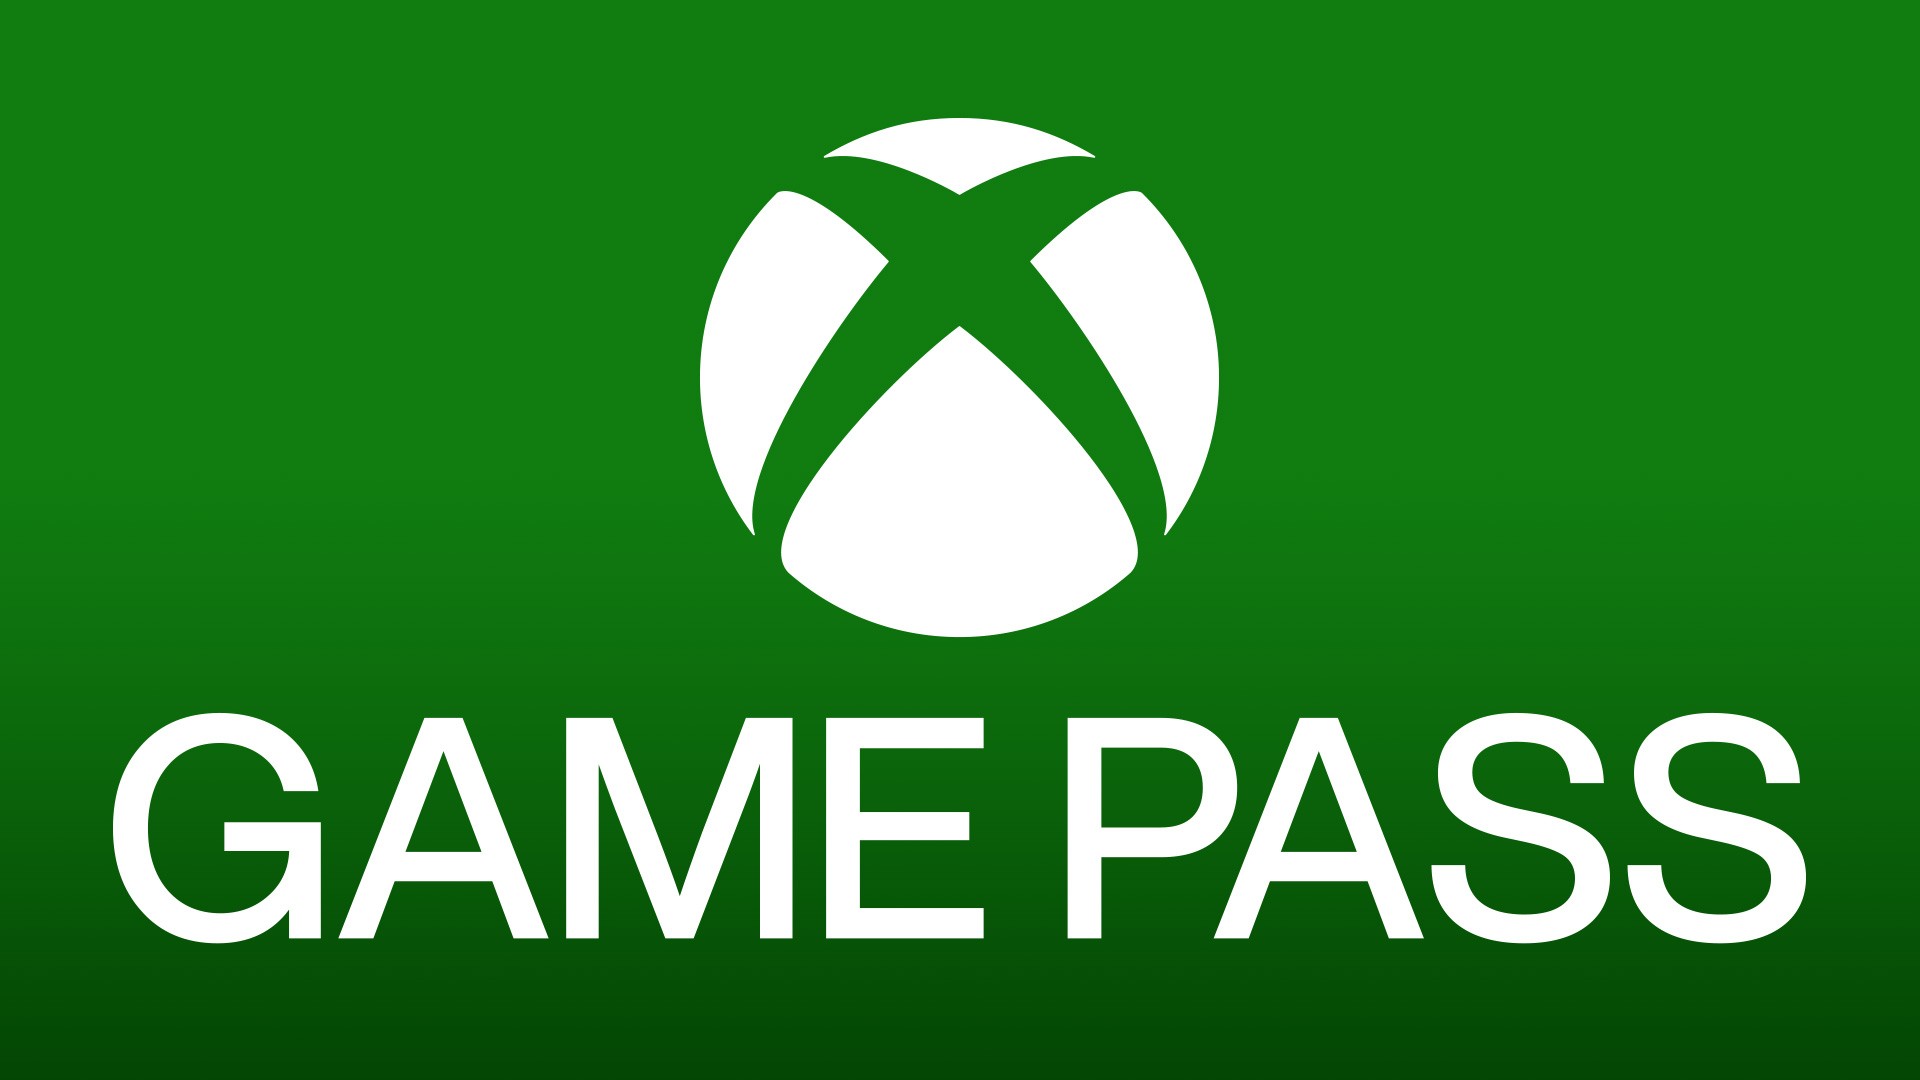 Phil Spencer Welcomes PC Game Pass to 40 new countries 